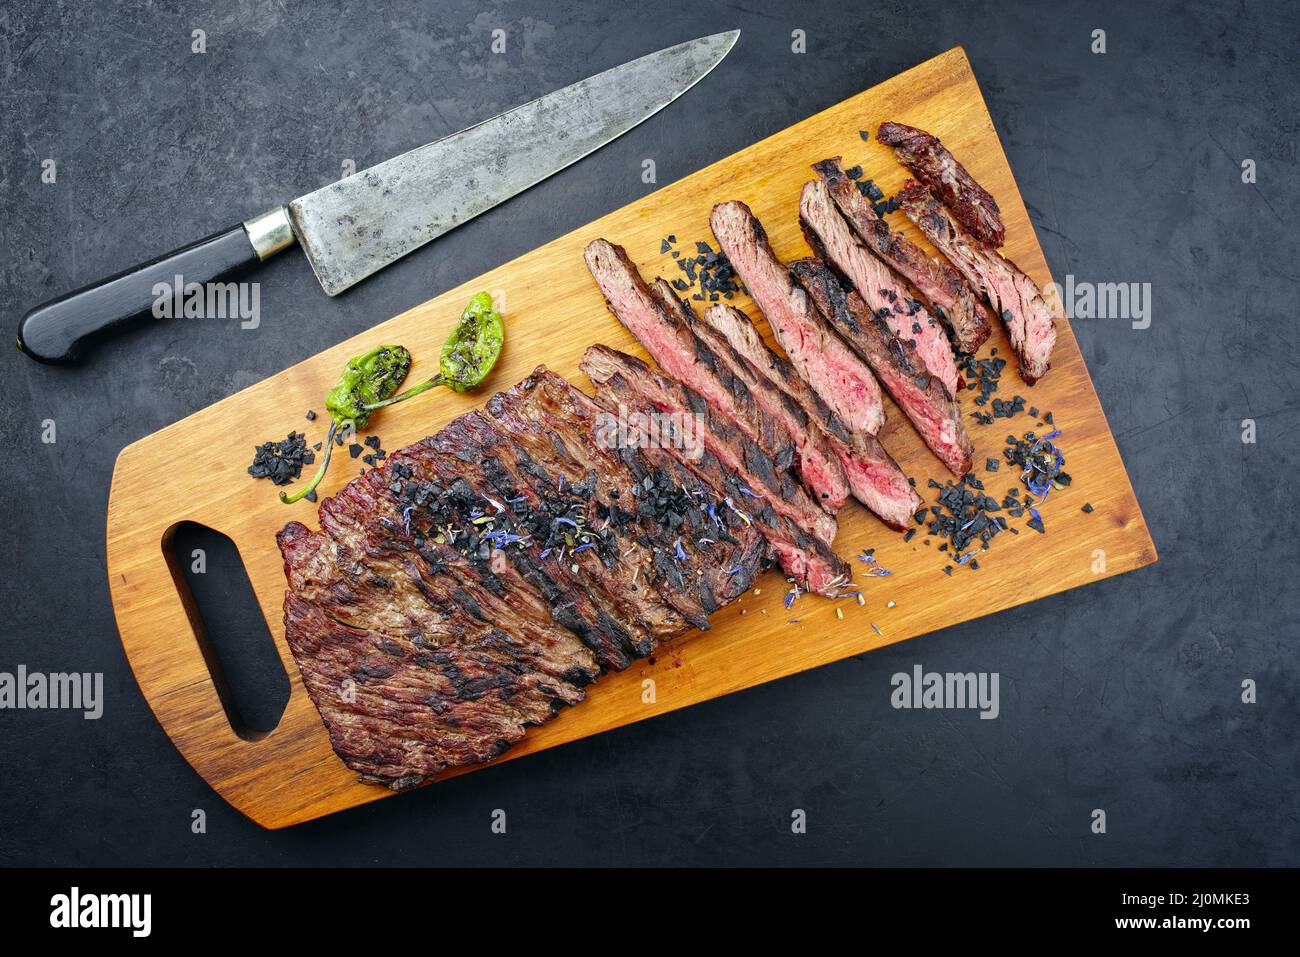 Modern style traditional barbecue wagyu bavette steak with green chili and spices served as top view on a wooden design board Stock Photo